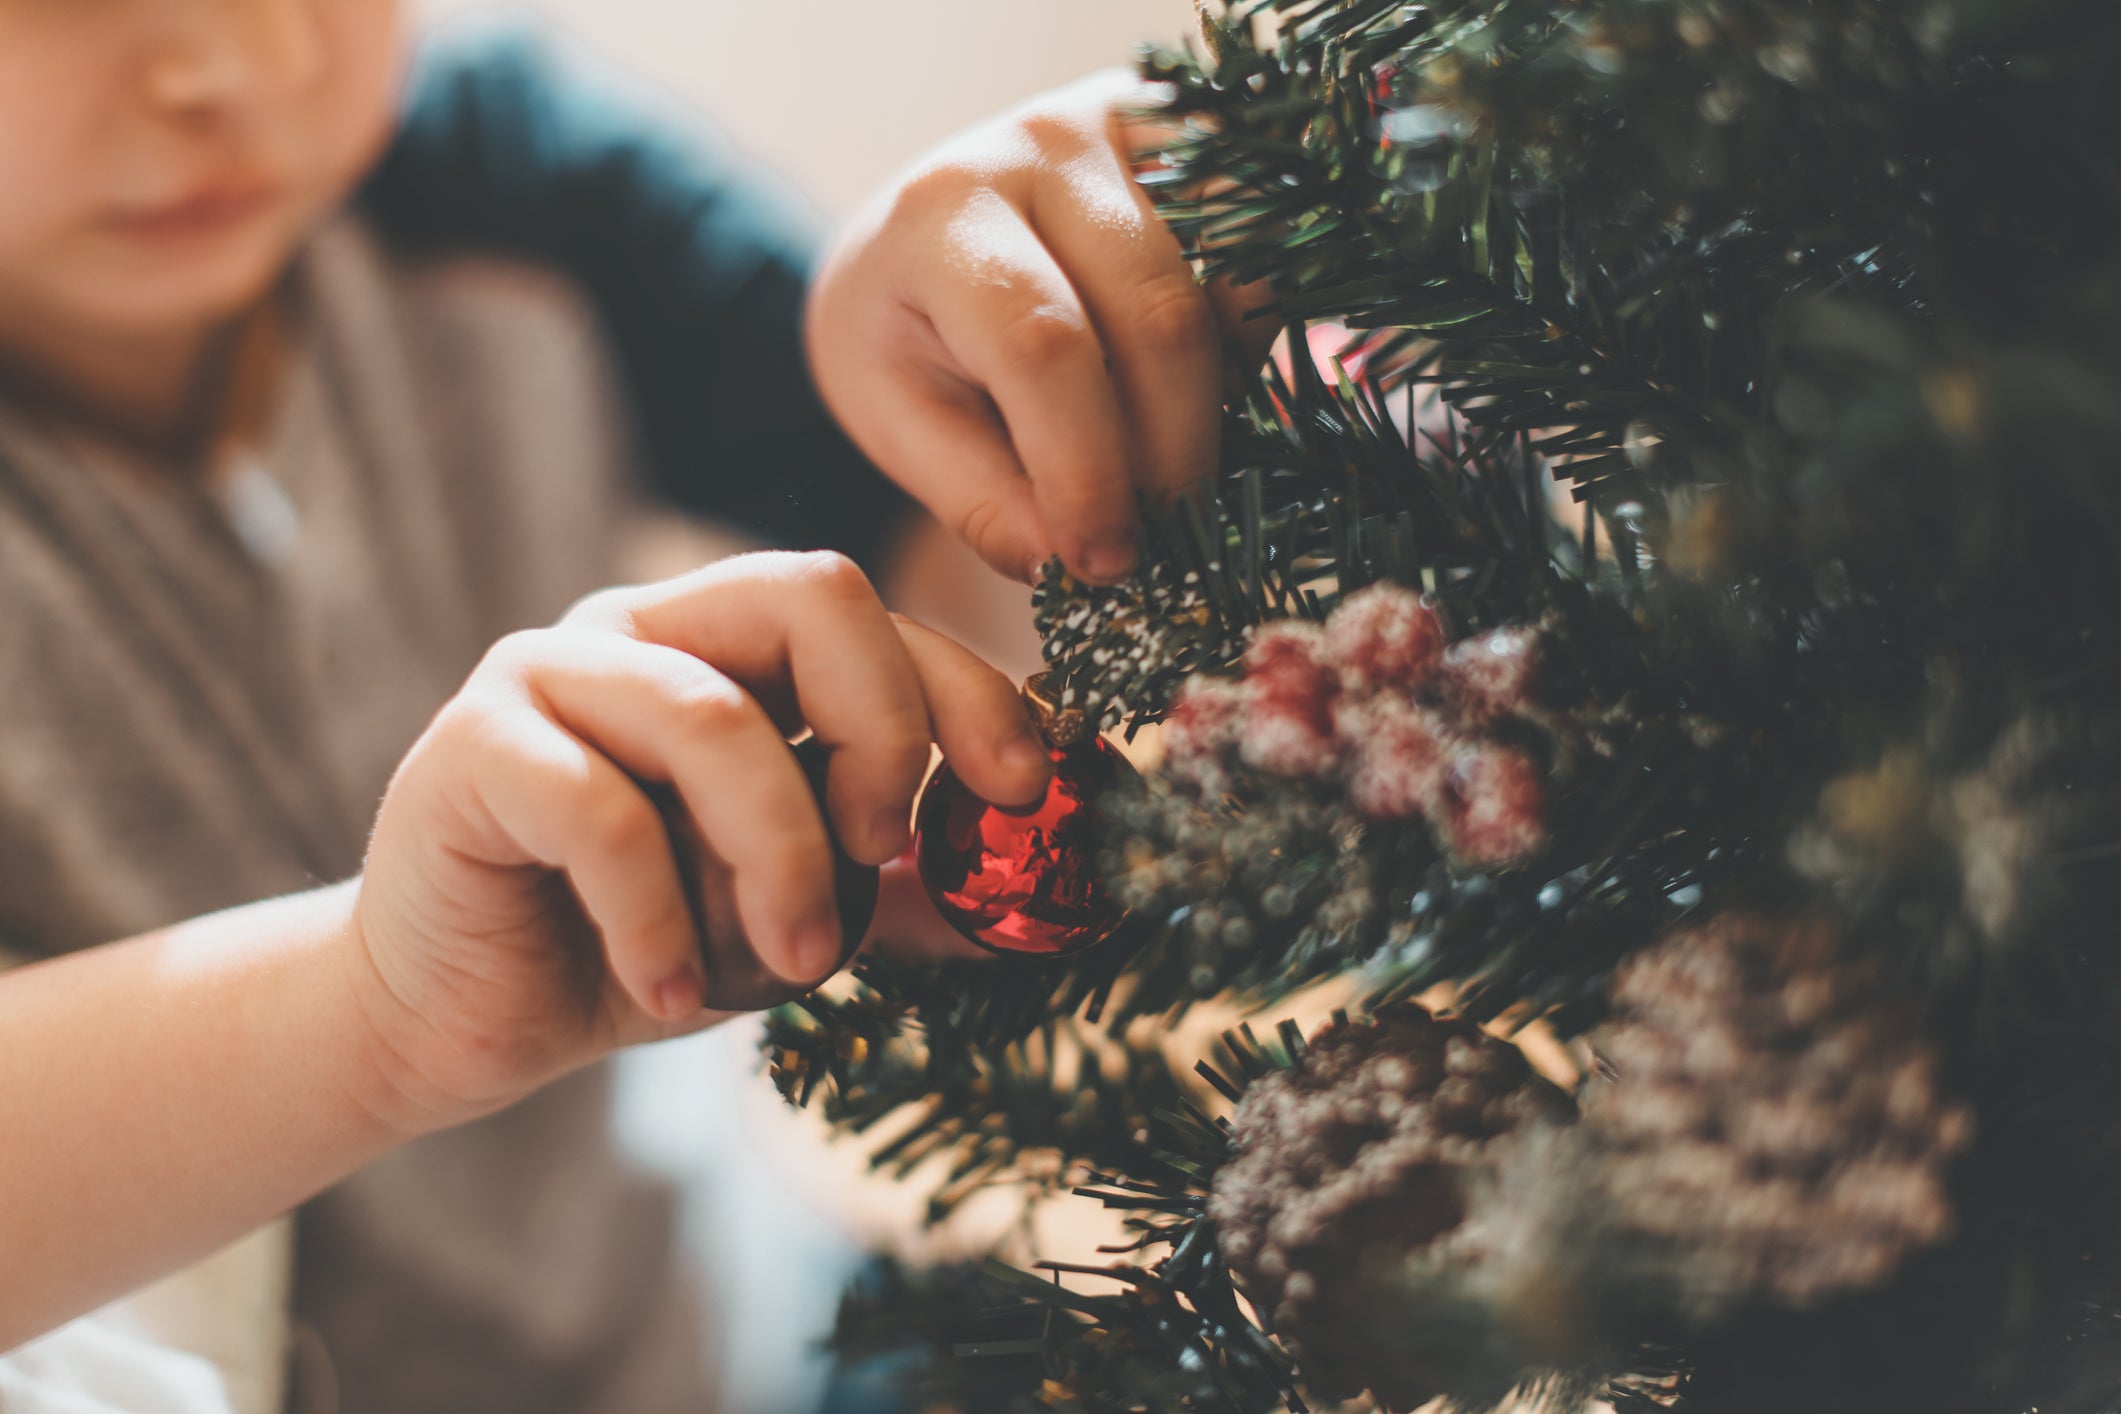 When should I take down my Christmas tree and decorations? | The ...